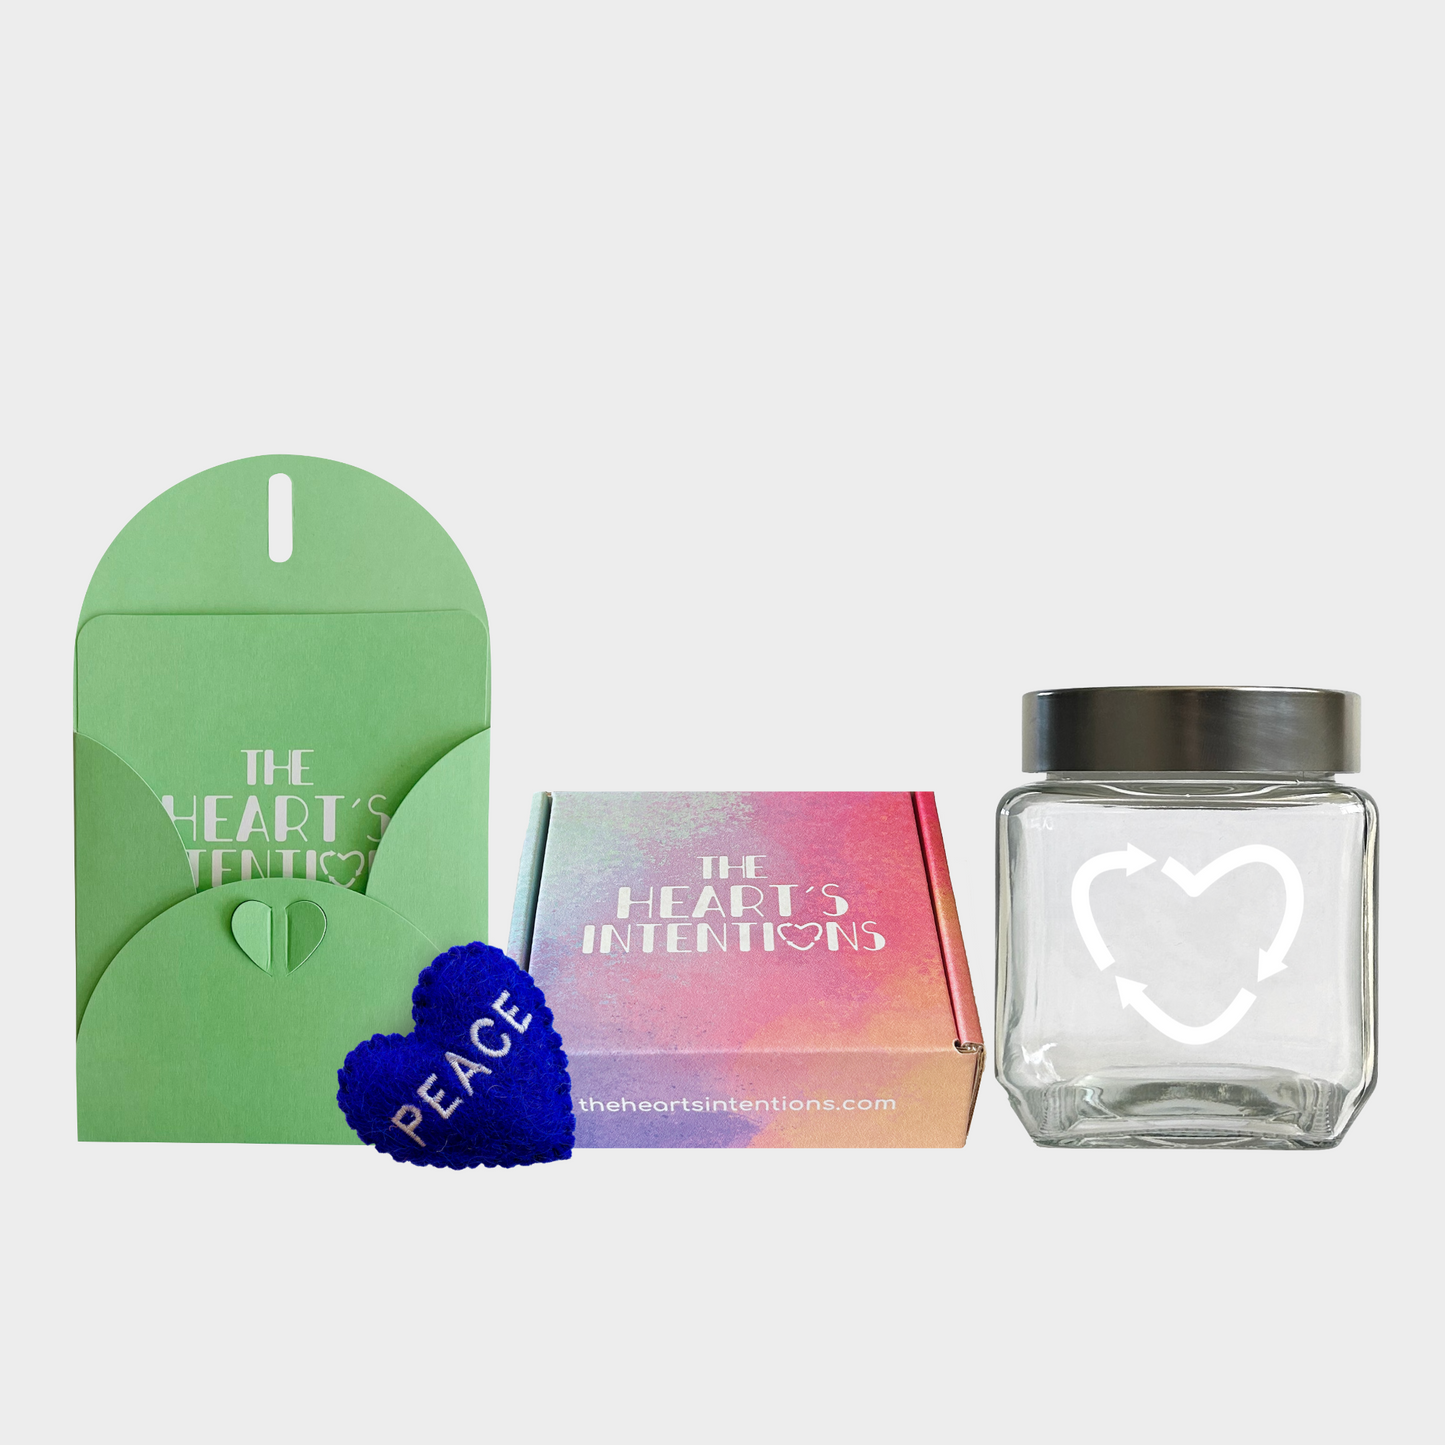 Card and Envelope Set + Heart + Heart Holder + The Heart’s Intentions Gift Box Bundle